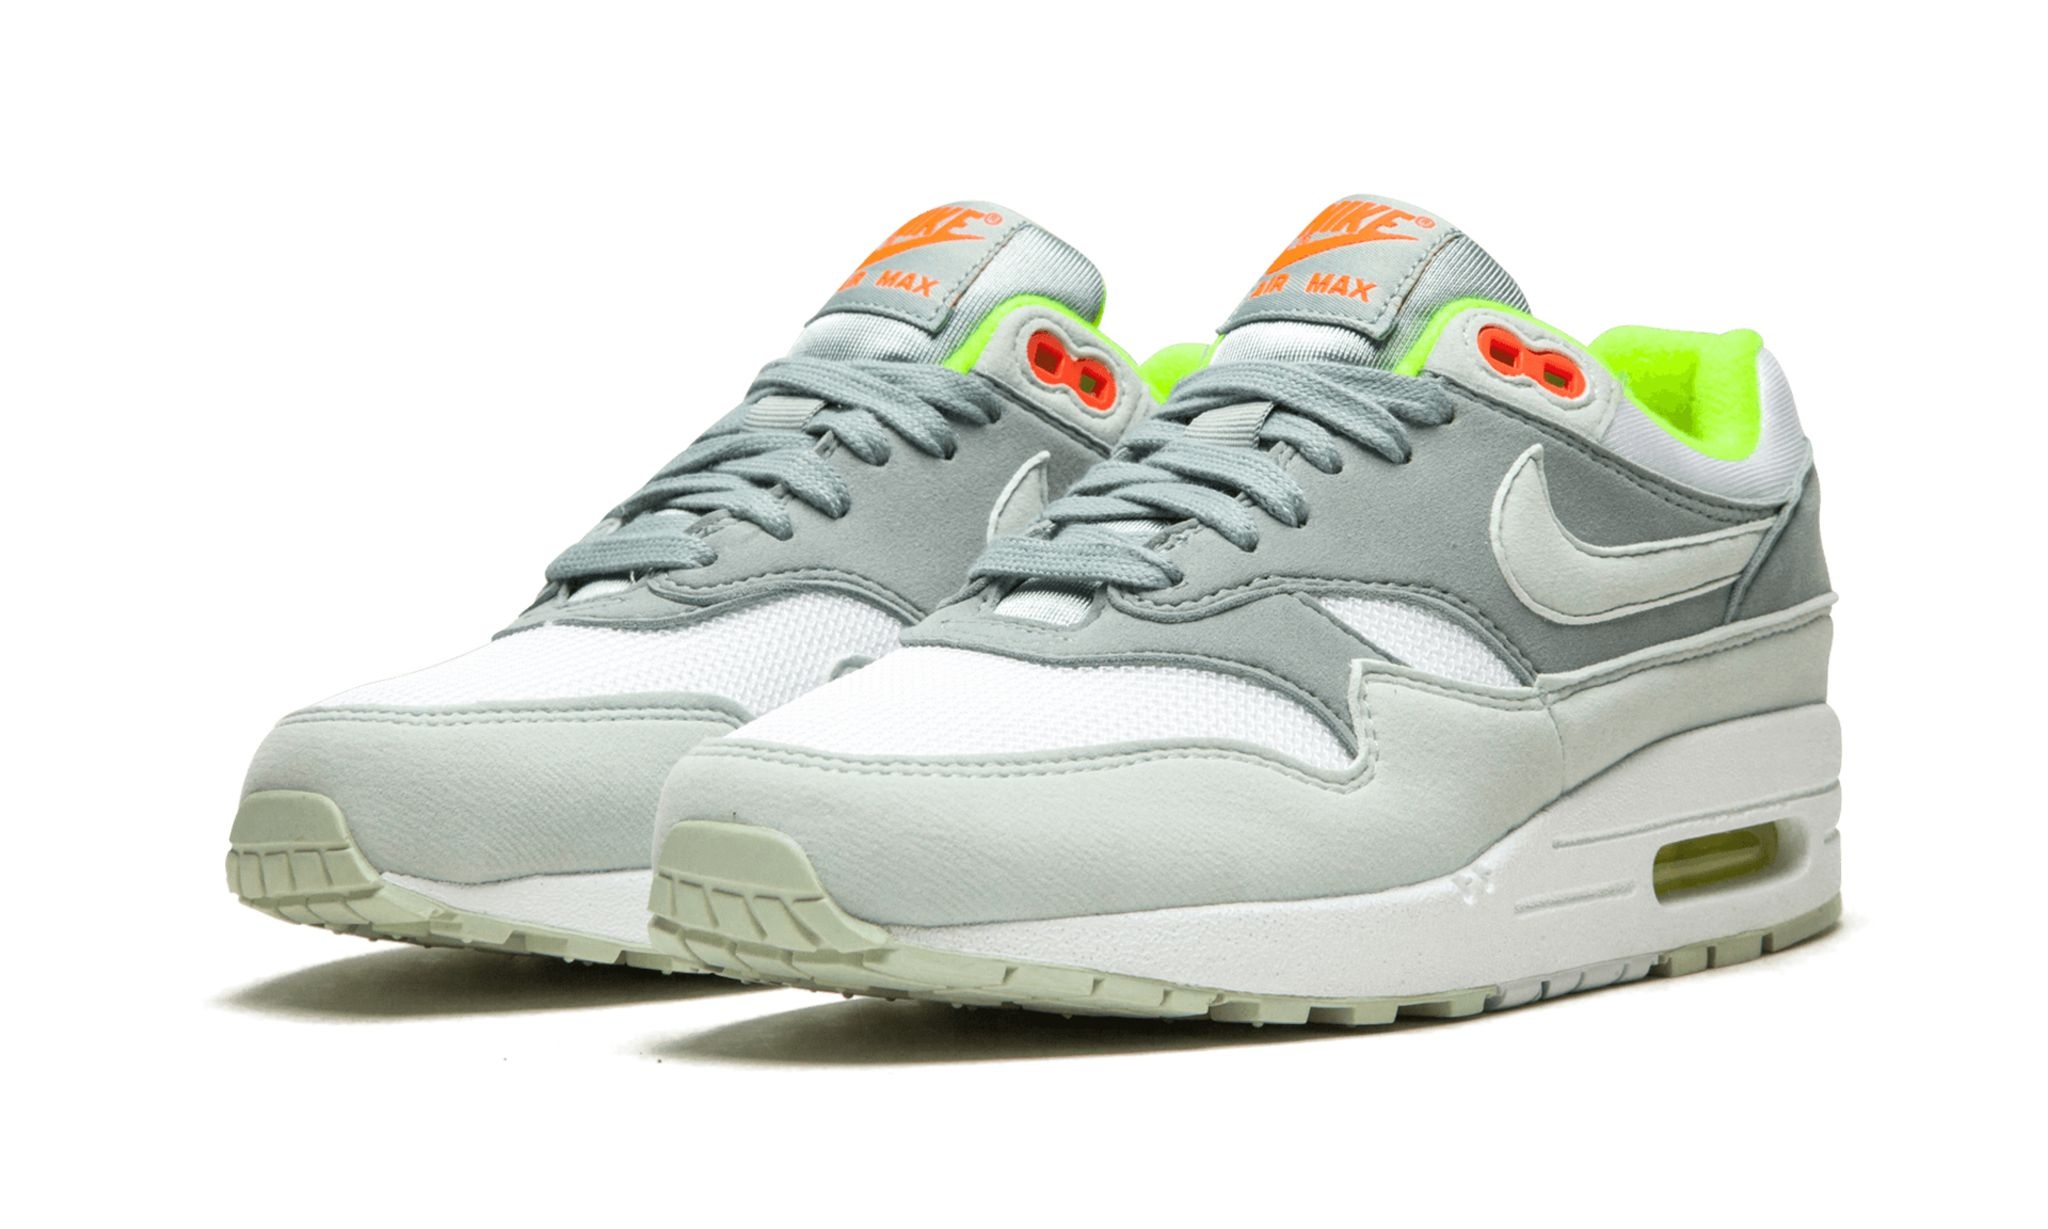 AIR MAX 1 WMNS "Barely Grey / Pumice" - 2